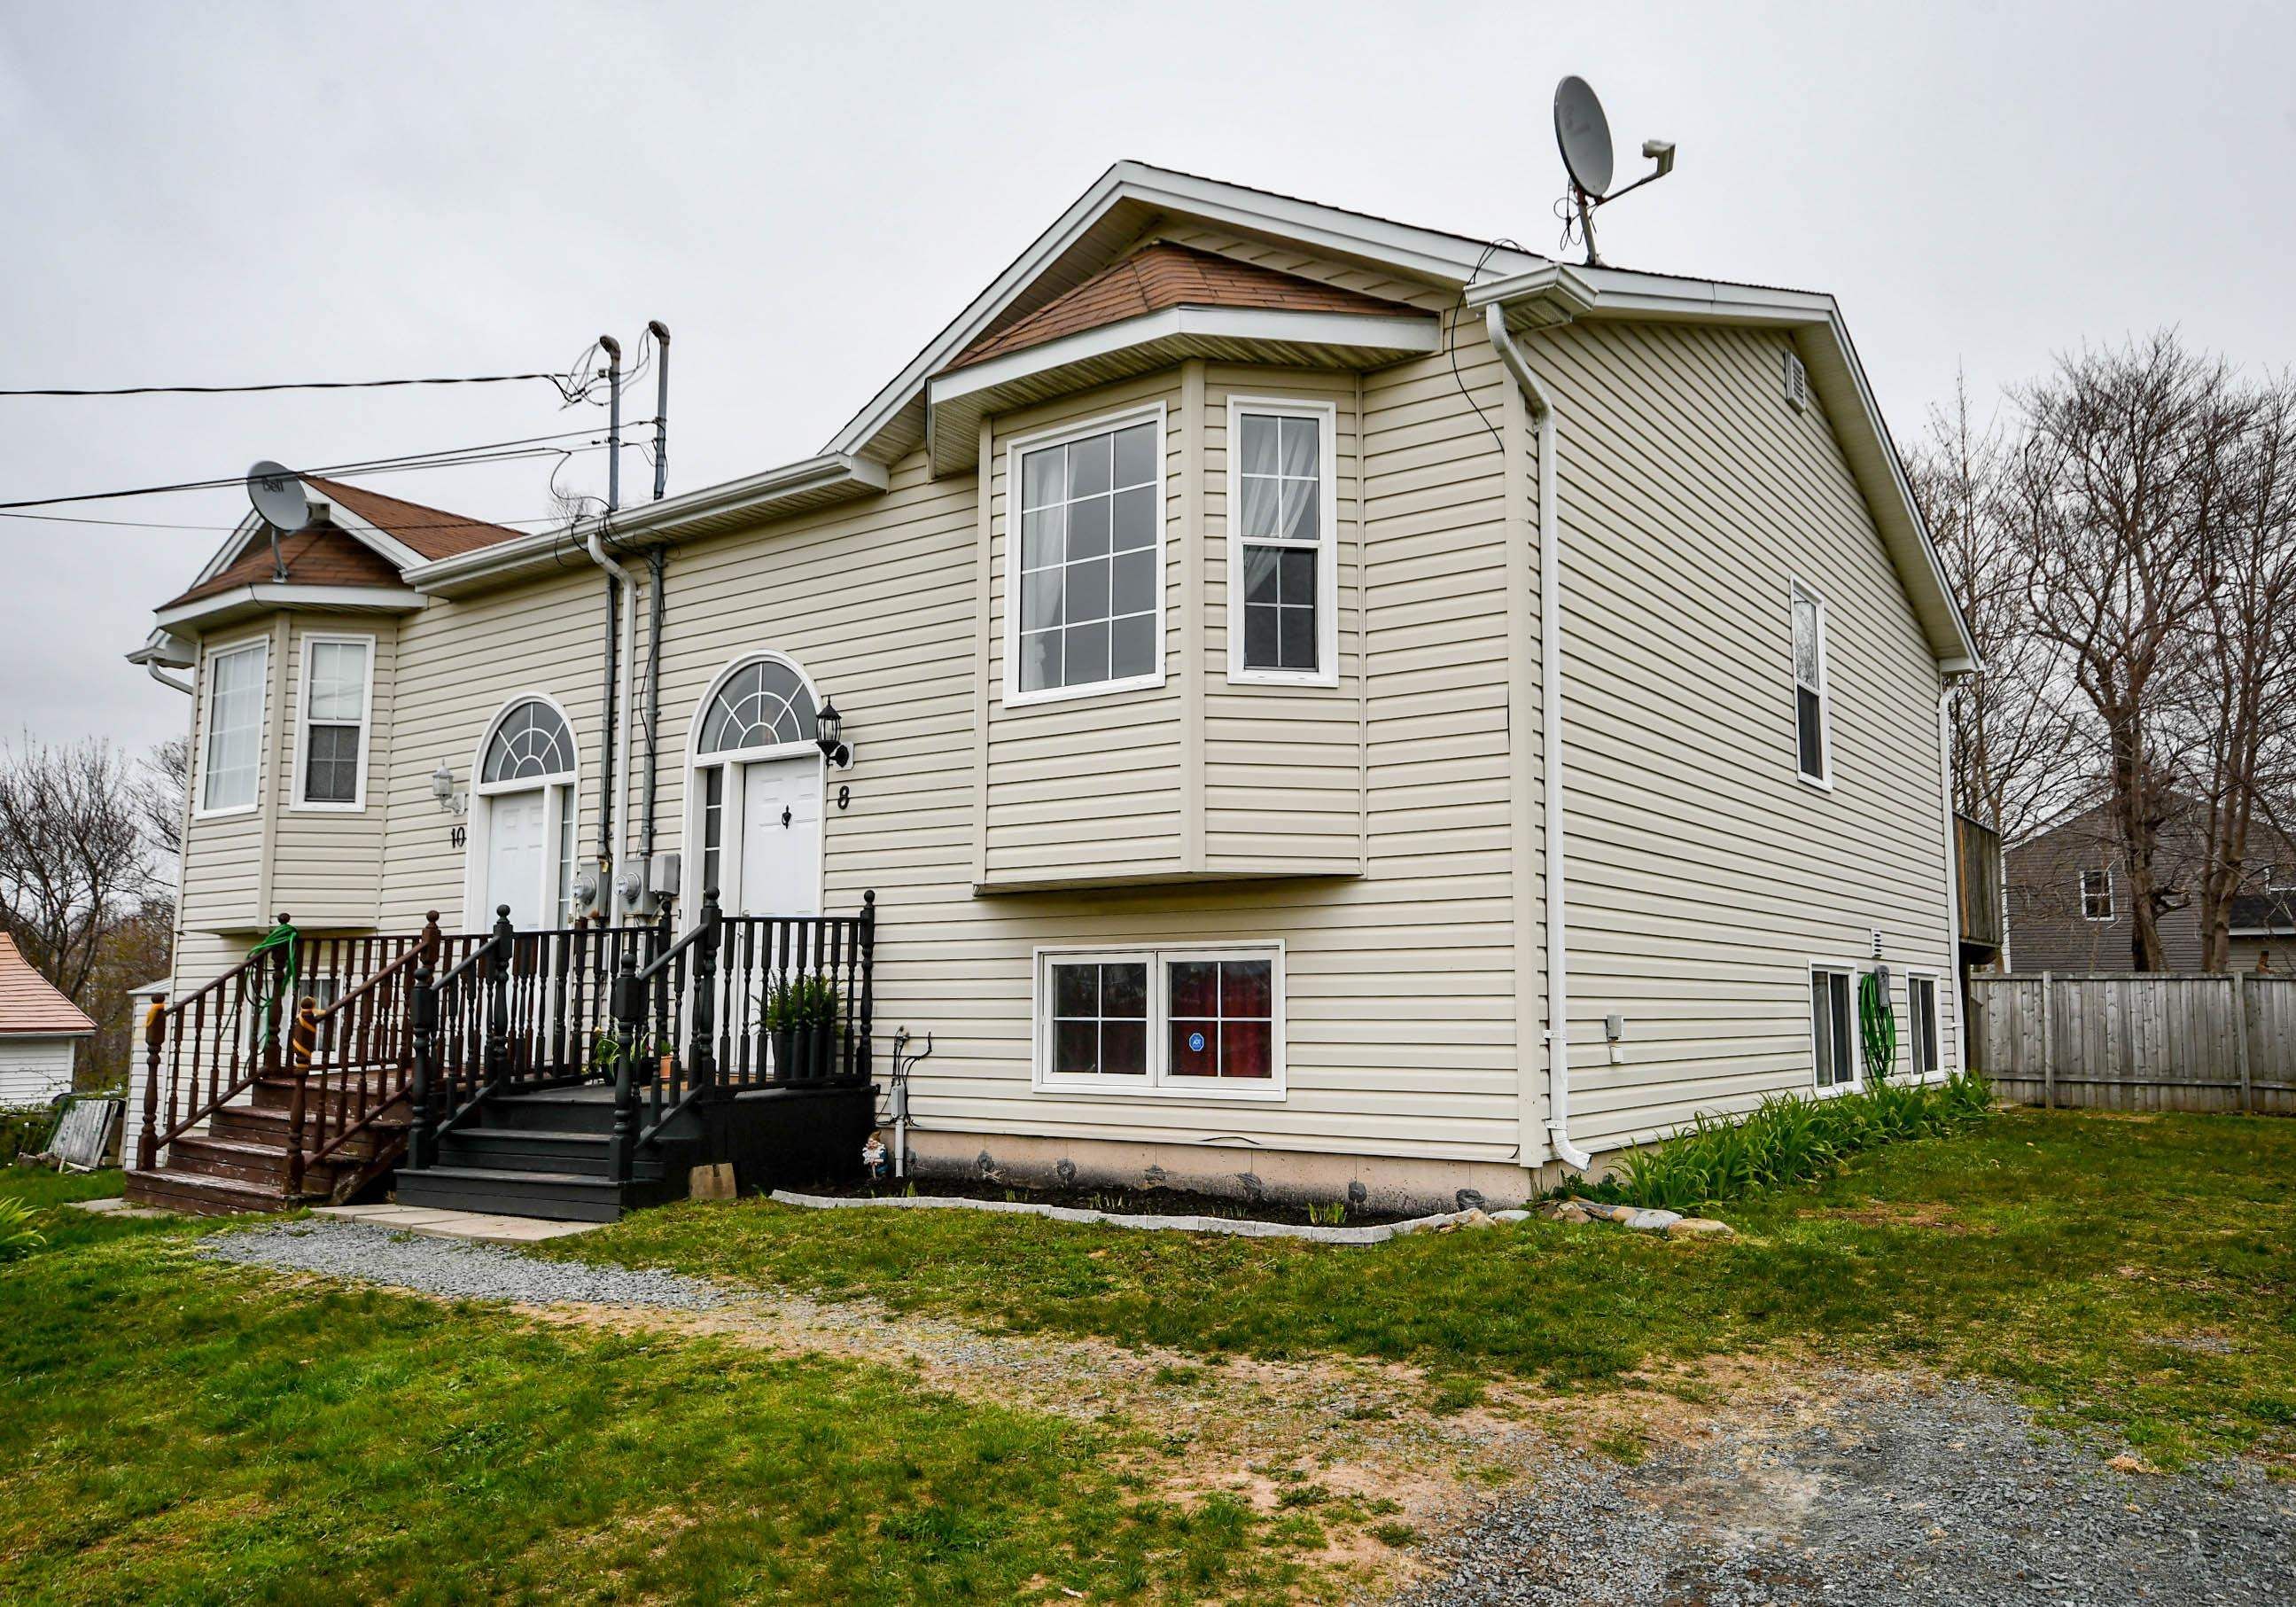 Main Photo: 8 Mason Street in Dartmouth: 11-Dartmouth Woodside, Eastern P Residential for sale (Halifax-Dartmouth)  : MLS®# 202210127